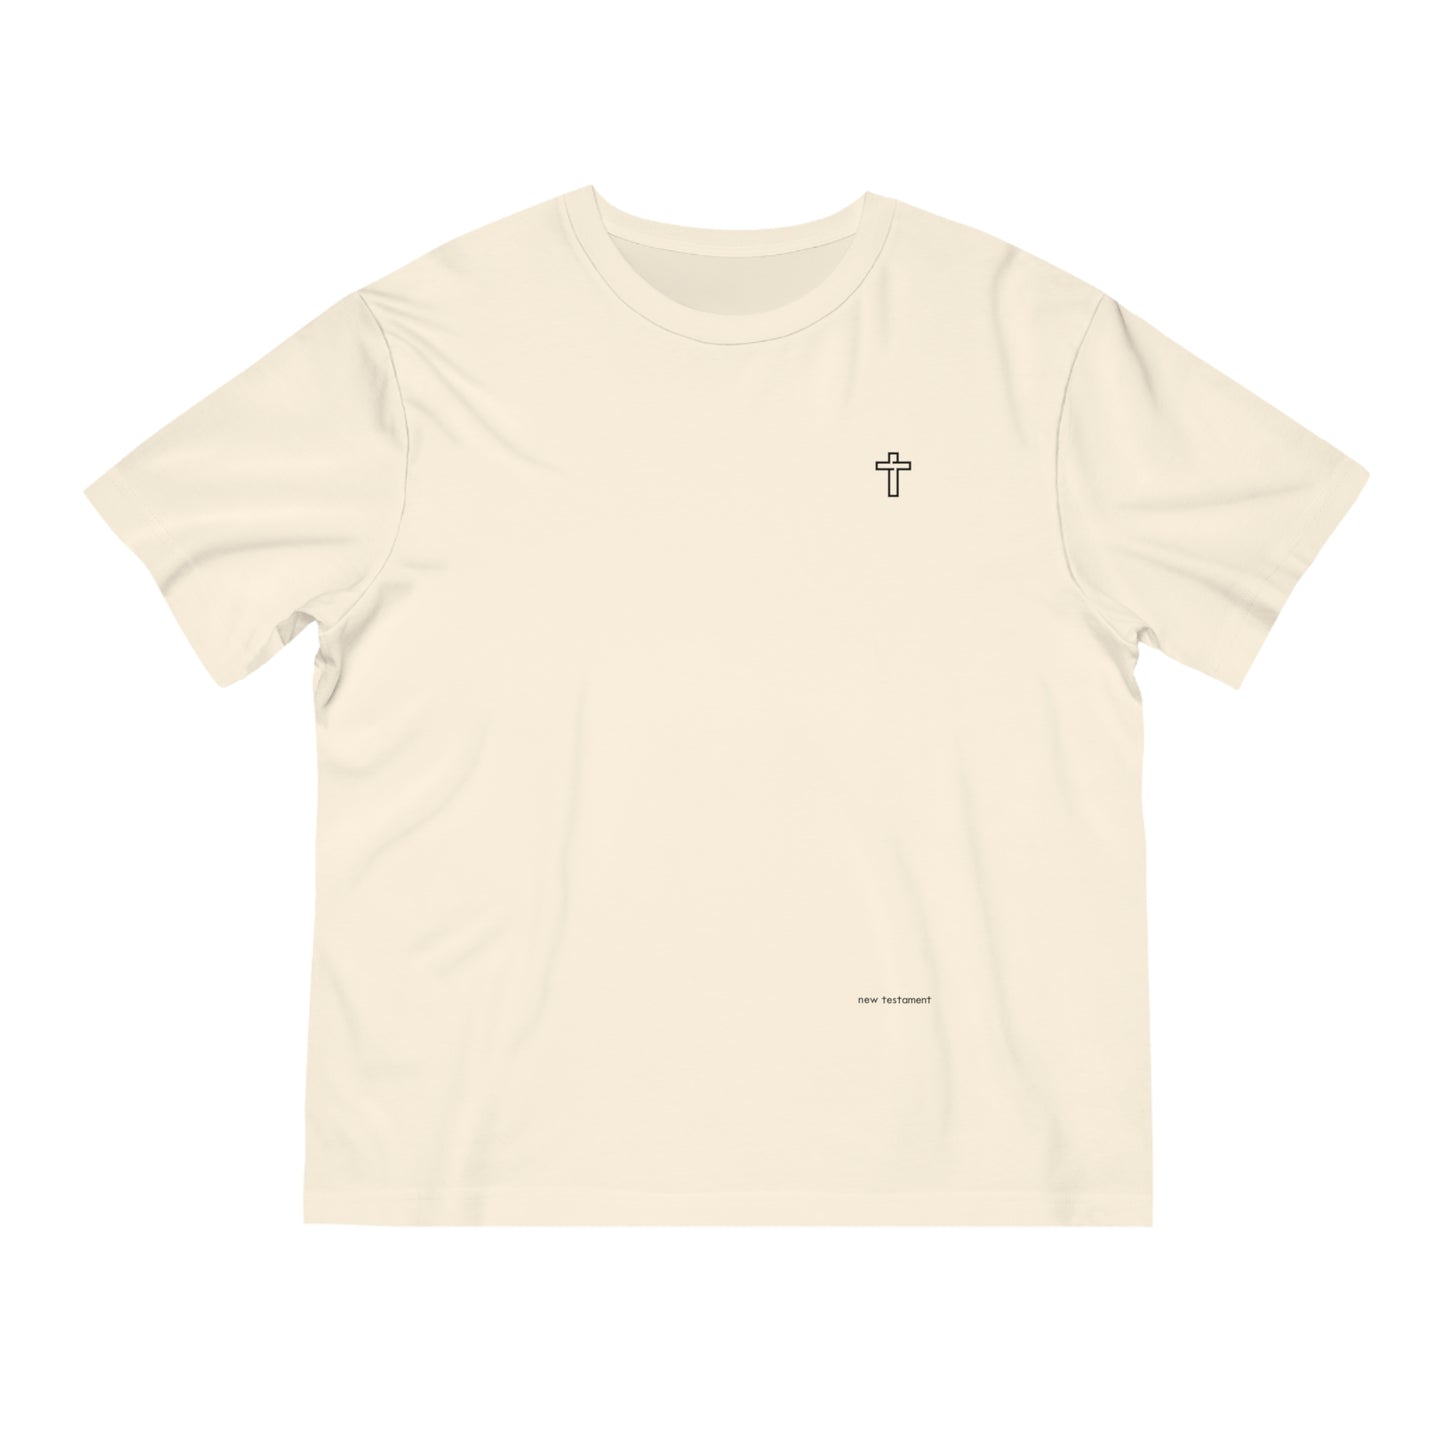 Logo's Relaxed Fit T